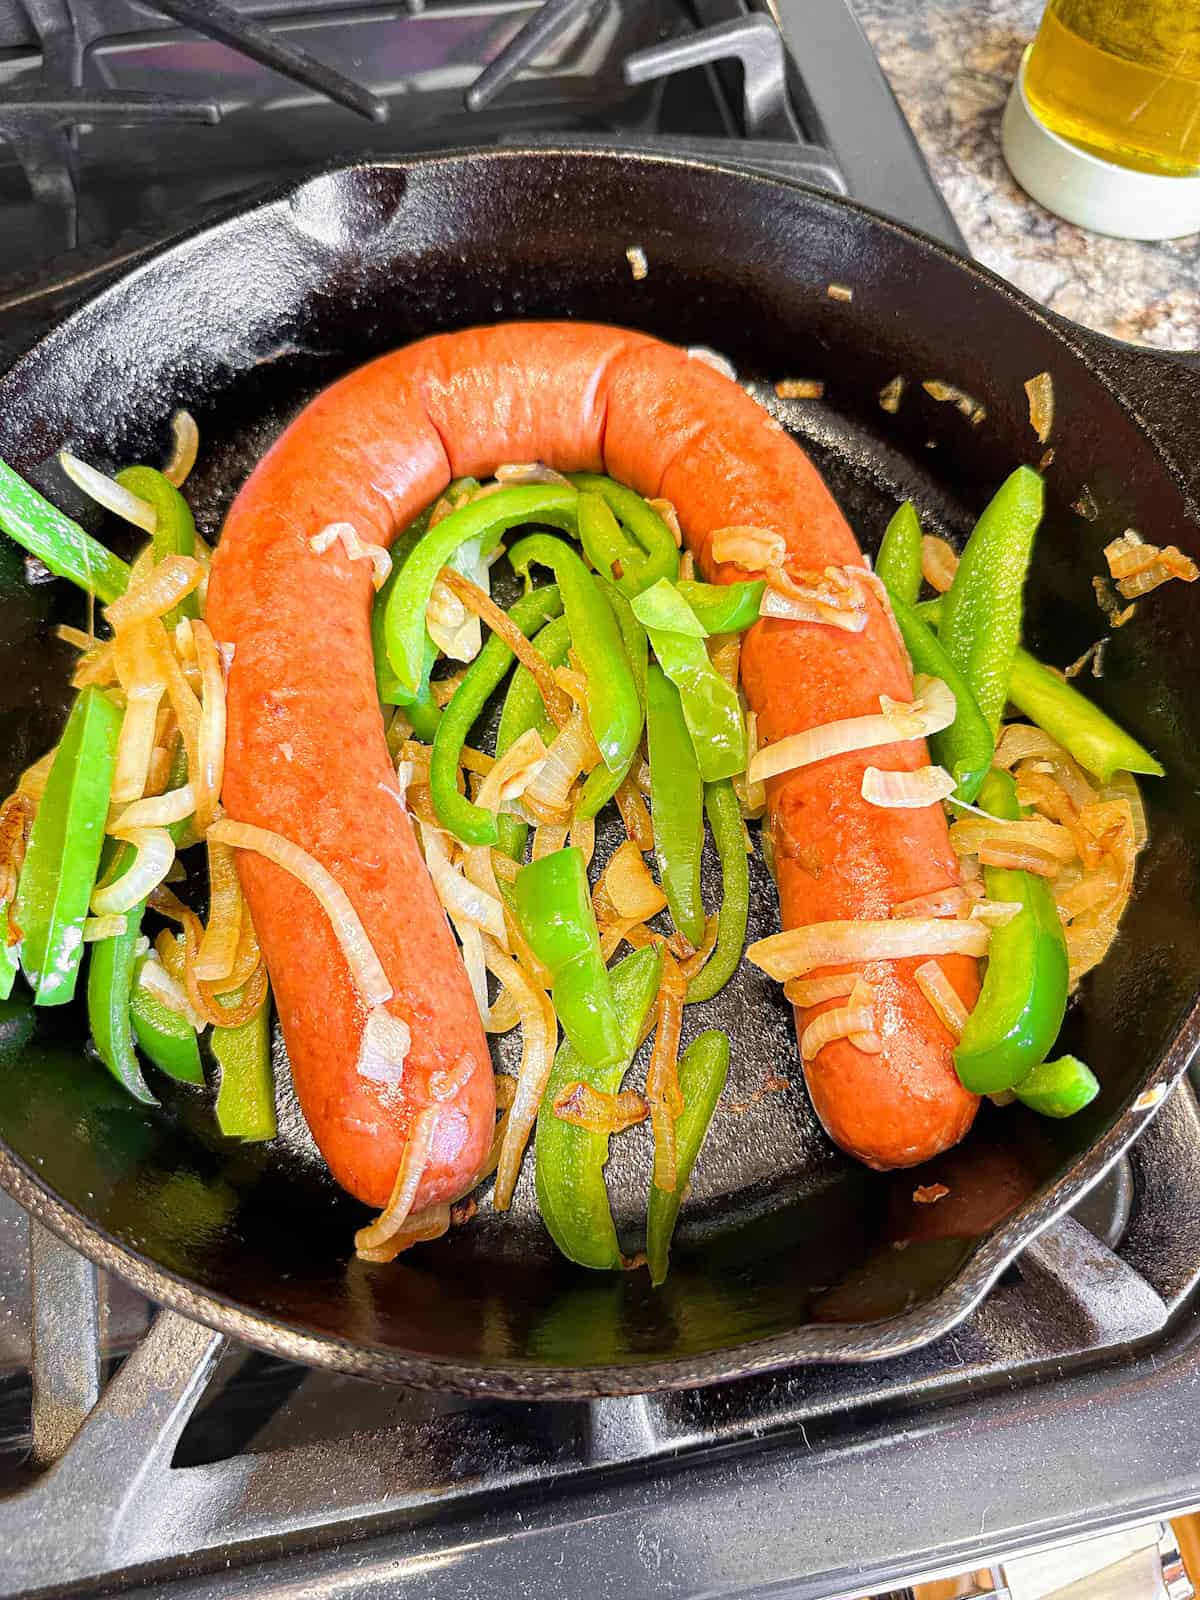 Kielbasa sausage with peppers and onions in a pan.